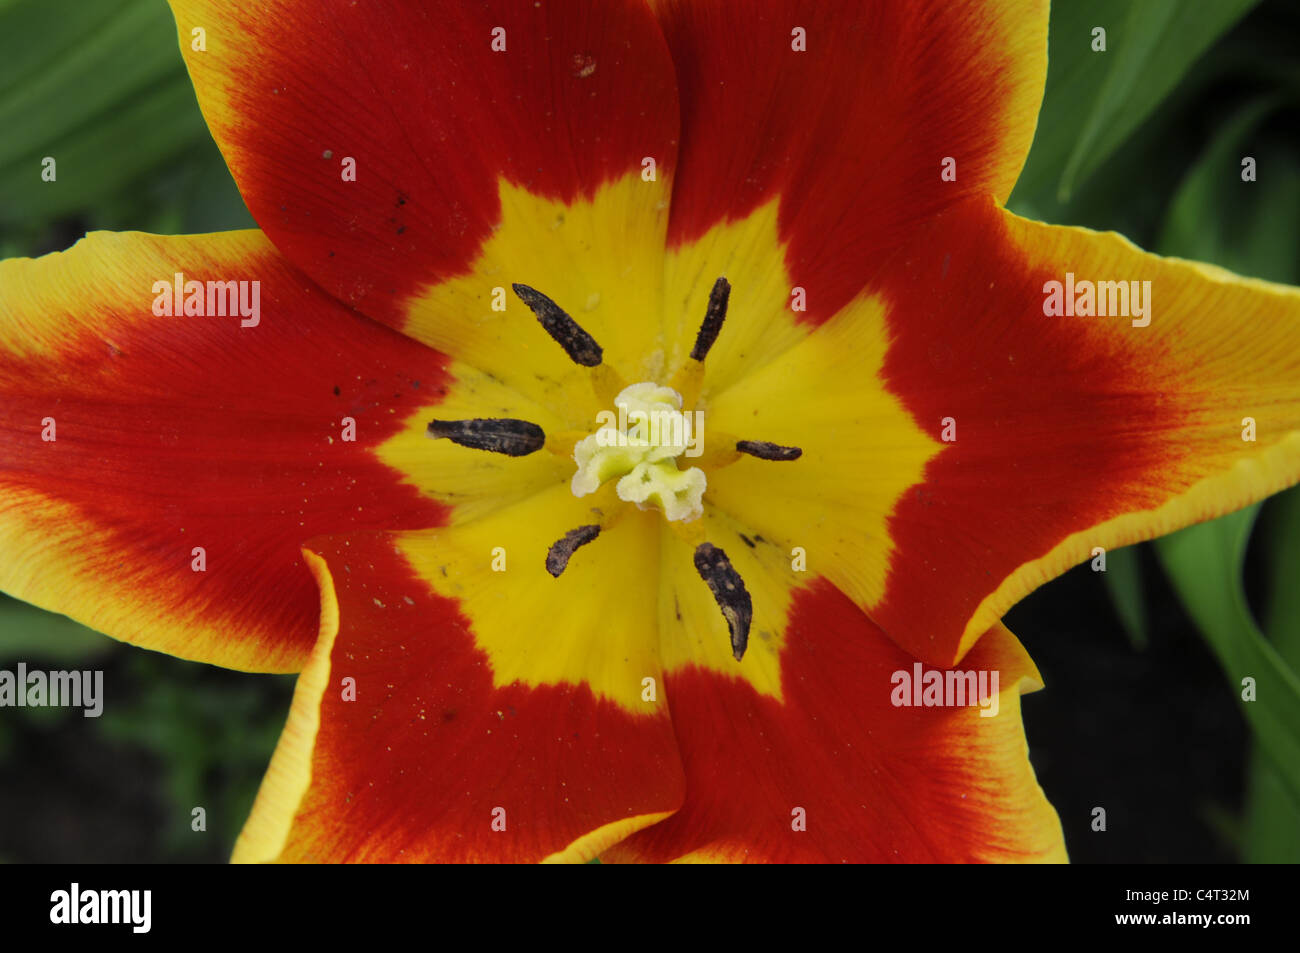 Close up image of red and yellow tulip flower showing details of petals stigma style anther and filament Staffordshire England Stock Photo